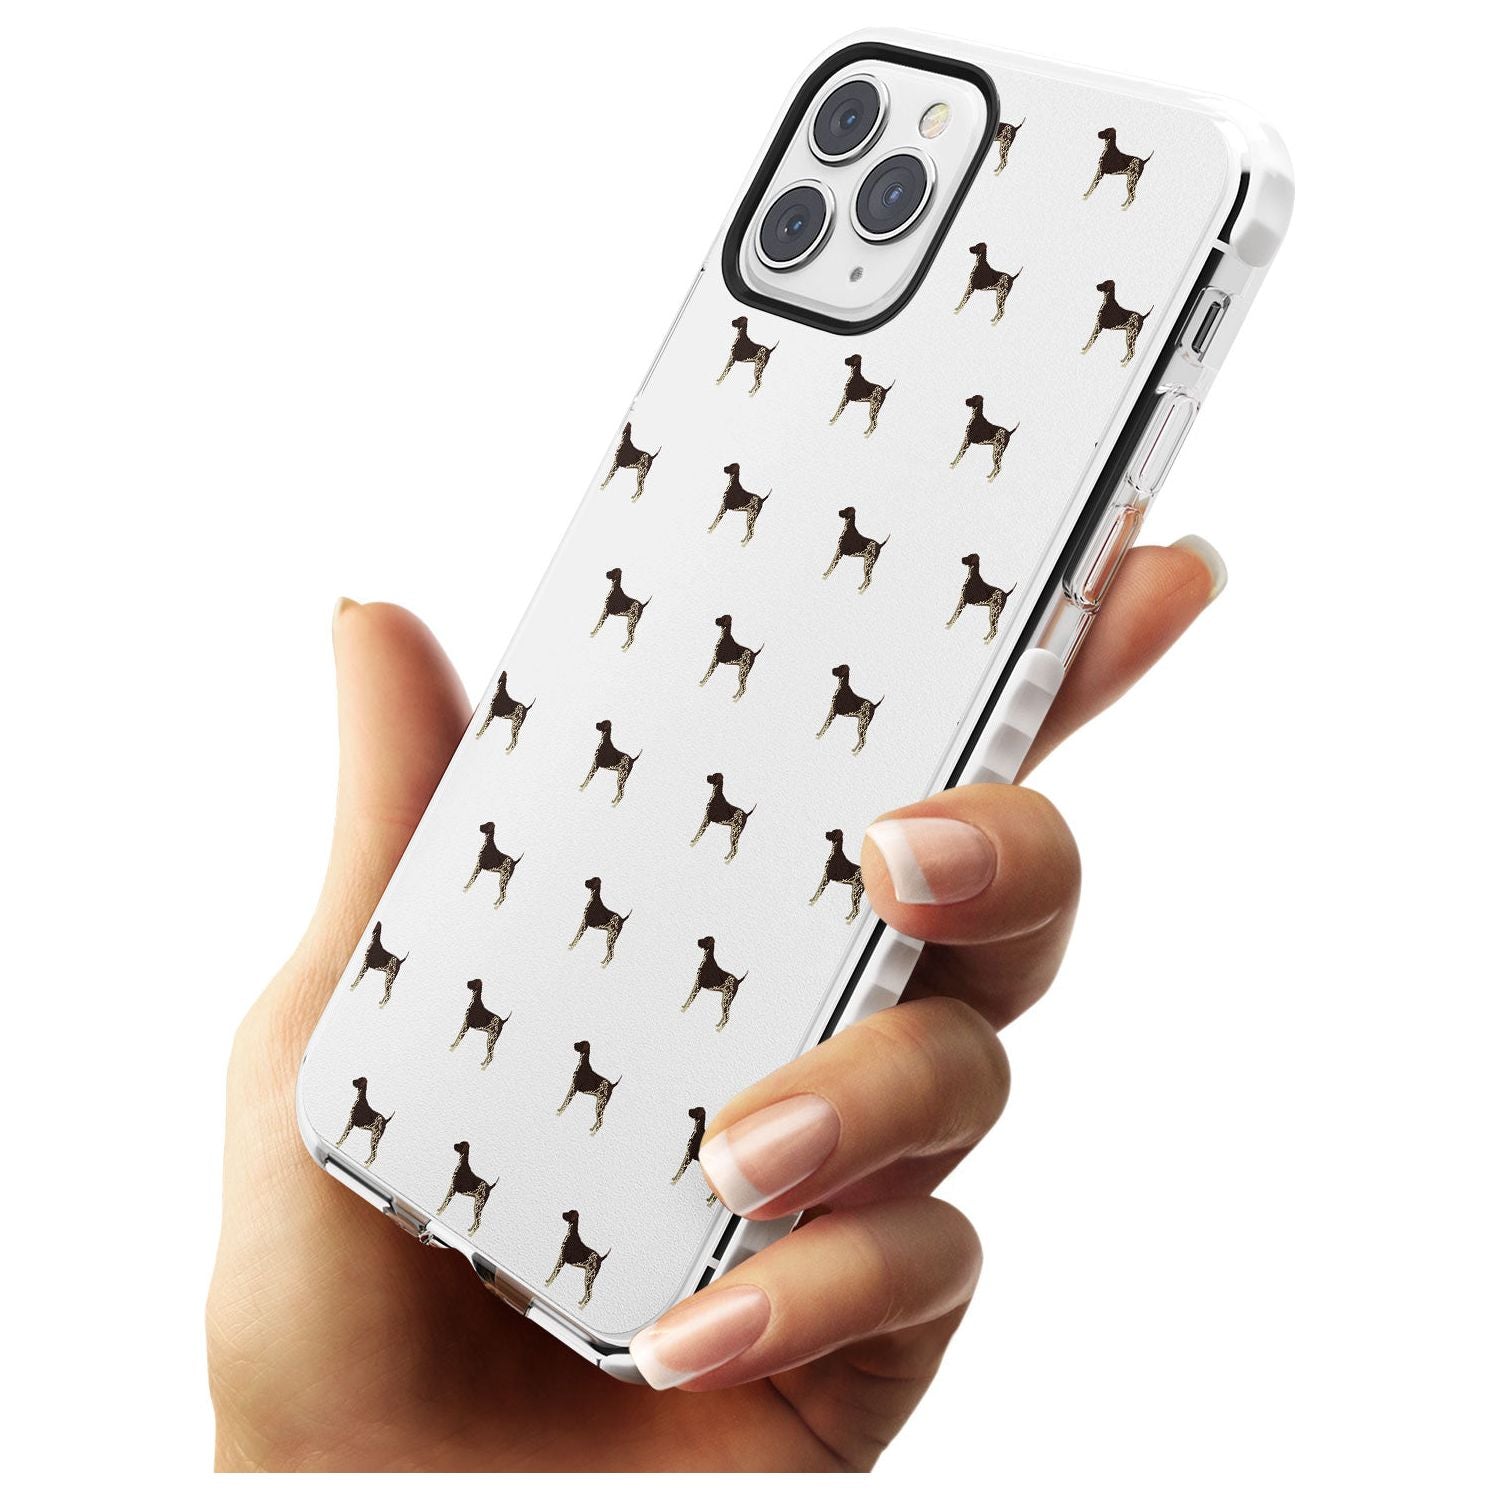 German Shorthaired Pointer Dog Pattern Impact Phone Case for iPhone 11 Pro Max